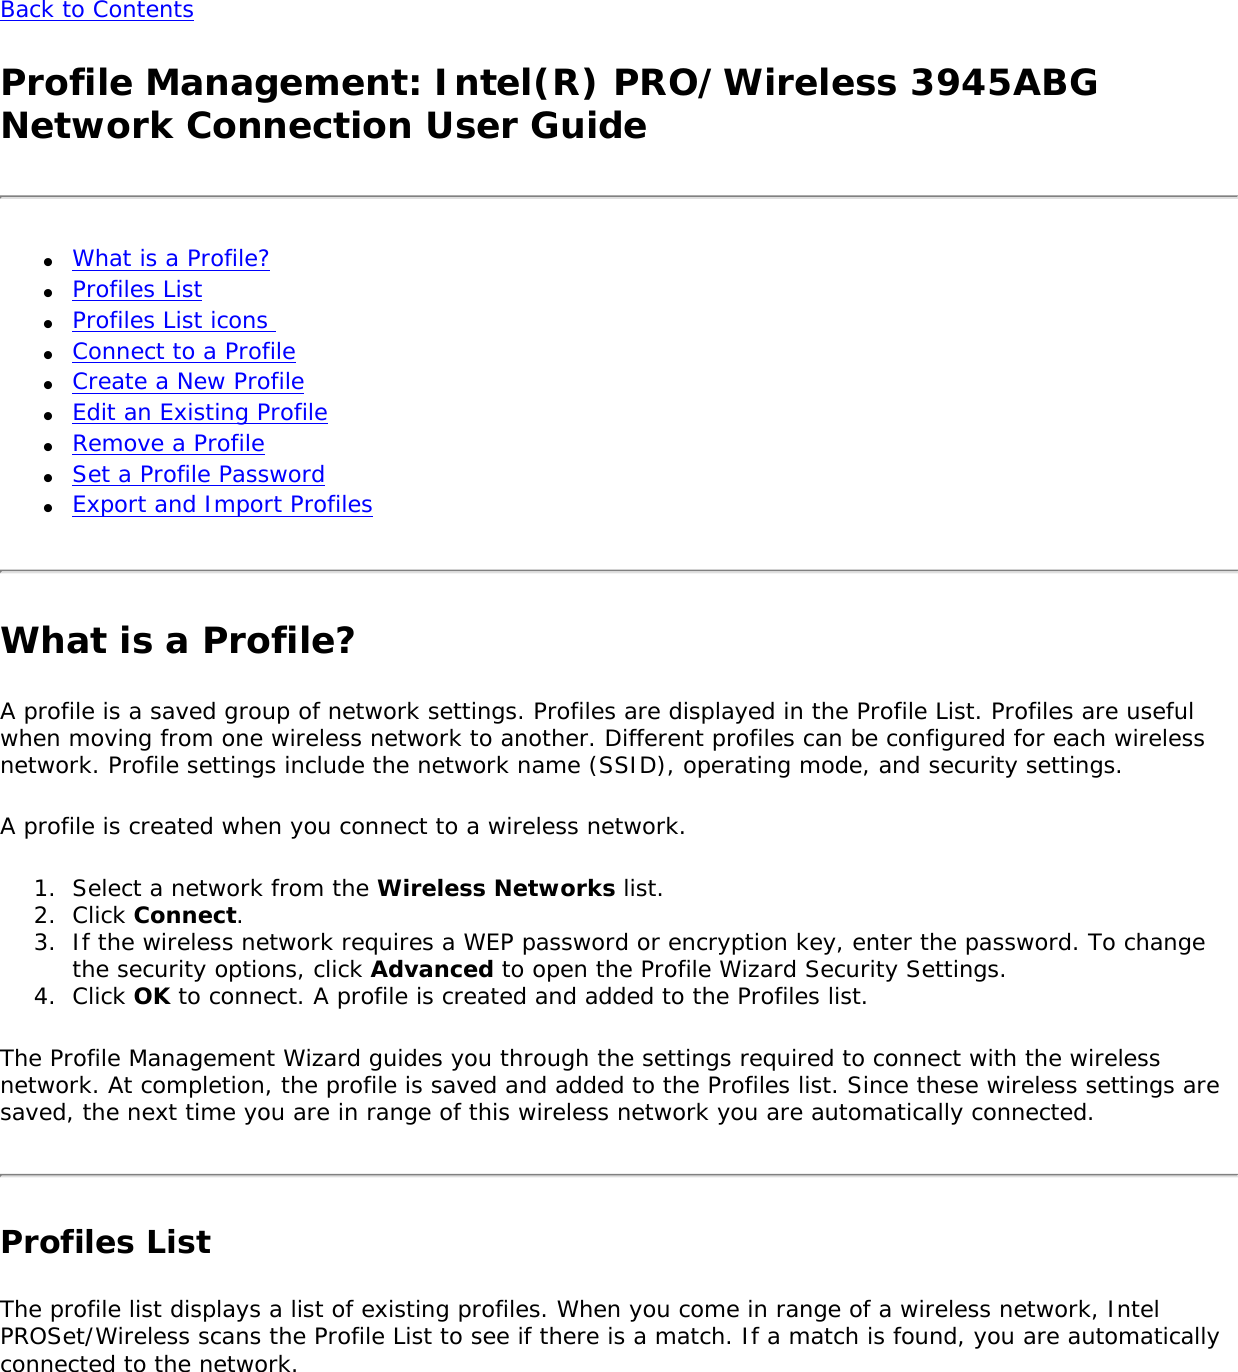 Back to Contents Profile Management: Intel(R) PRO/Wireless 3945ABG Network Connection User Guide●     What is a Profile? ●     Profiles List ●     Profiles List icons ●     Connect to a Profile ●     Create a New Profile●     Edit an Existing Profile●     Remove a Profile●     Set a Profile Password ●     Export and Import Profiles What is a Profile?A profile is a saved group of network settings. Profiles are displayed in the Profile List. Profiles are useful when moving from one wireless network to another. Different profiles can be configured for each wireless network. Profile settings include the network name (SSID), operating mode, and security settings. A profile is created when you connect to a wireless network. 1.  Select a network from the Wireless Networks list.2.  Click Connect. 3.  If the wireless network requires a WEP password or encryption key, enter the password. To change the security options, click Advanced to open the Profile Wizard Security Settings. 4.  Click OK to connect. A profile is created and added to the Profiles list.The Profile Management Wizard guides you through the settings required to connect with the wireless network. At completion, the profile is saved and added to the Profiles list. Since these wireless settings are saved, the next time you are in range of this wireless network you are automatically connected. Profiles ListThe profile list displays a list of existing profiles. When you come in range of a wireless network, Intel PROSet/Wireless scans the Profile List to see if there is a match. If a match is found, you are automatically connected to the network.   